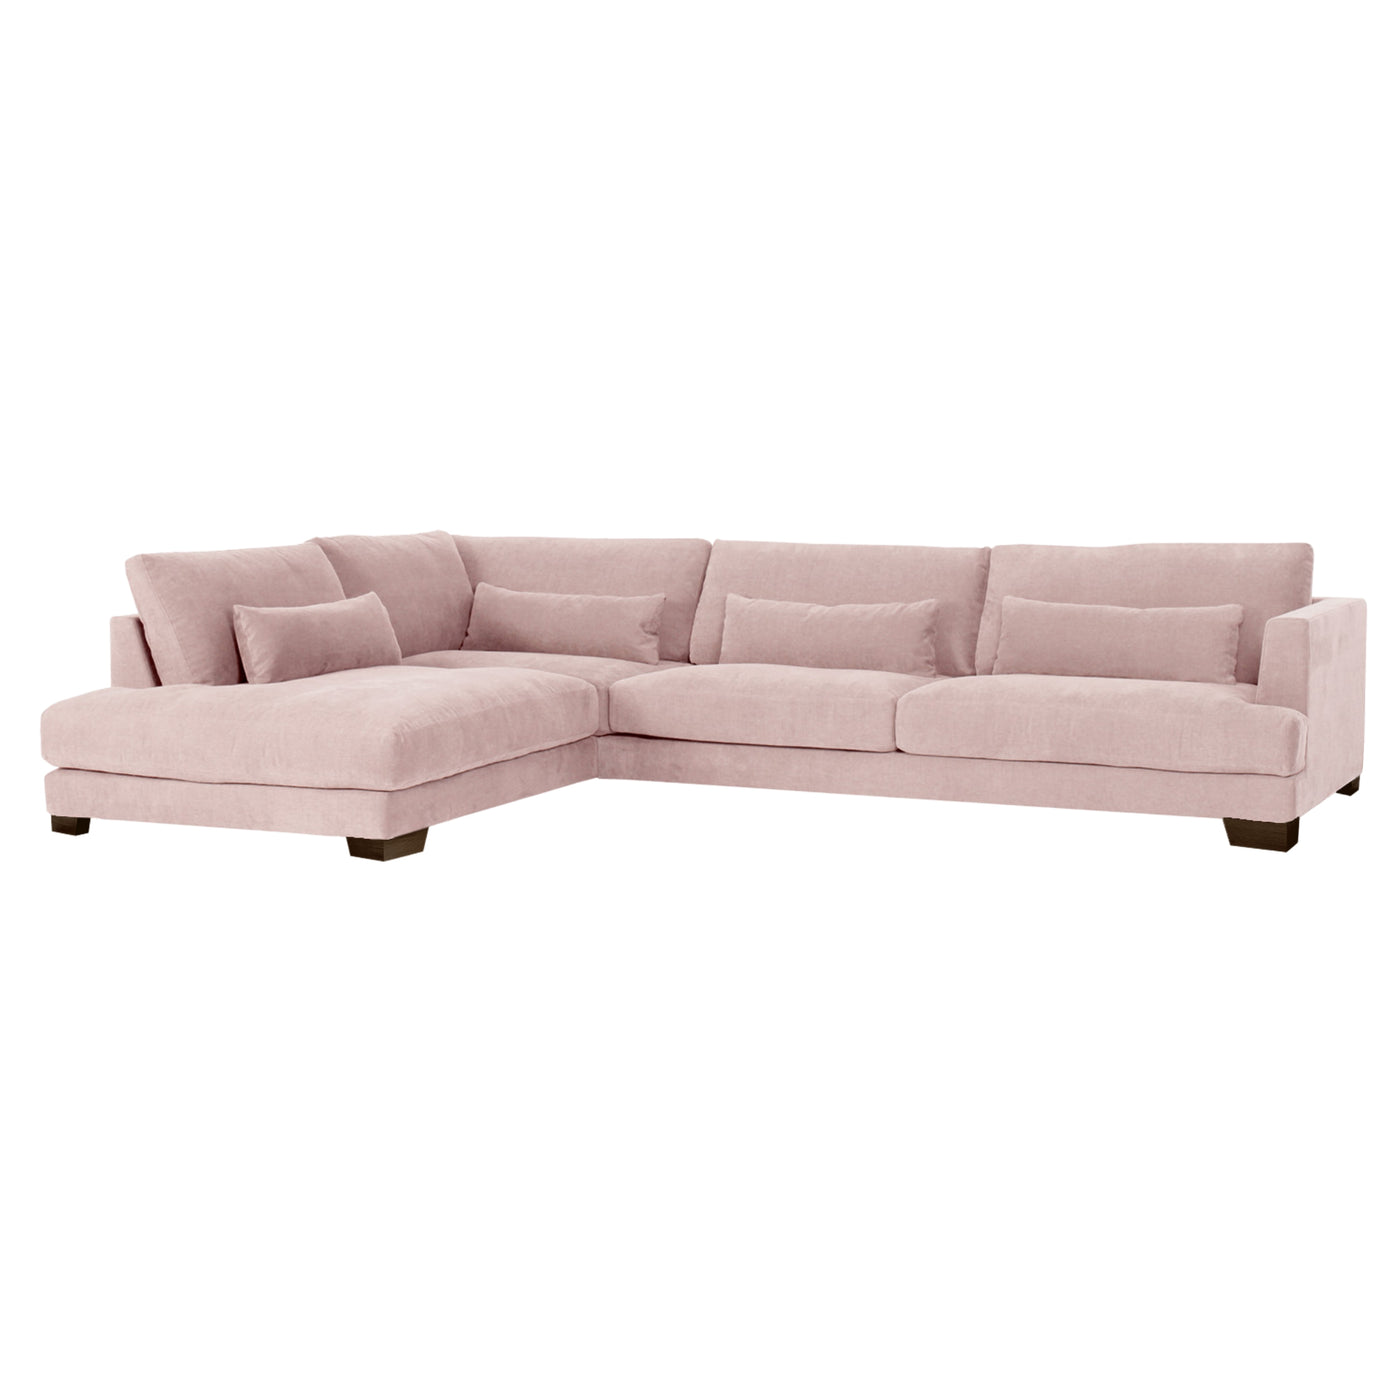 someday designs toft corner sofa in pure 04 nude pink with walnut legs LHF. #colour_pure-04-nude-pink